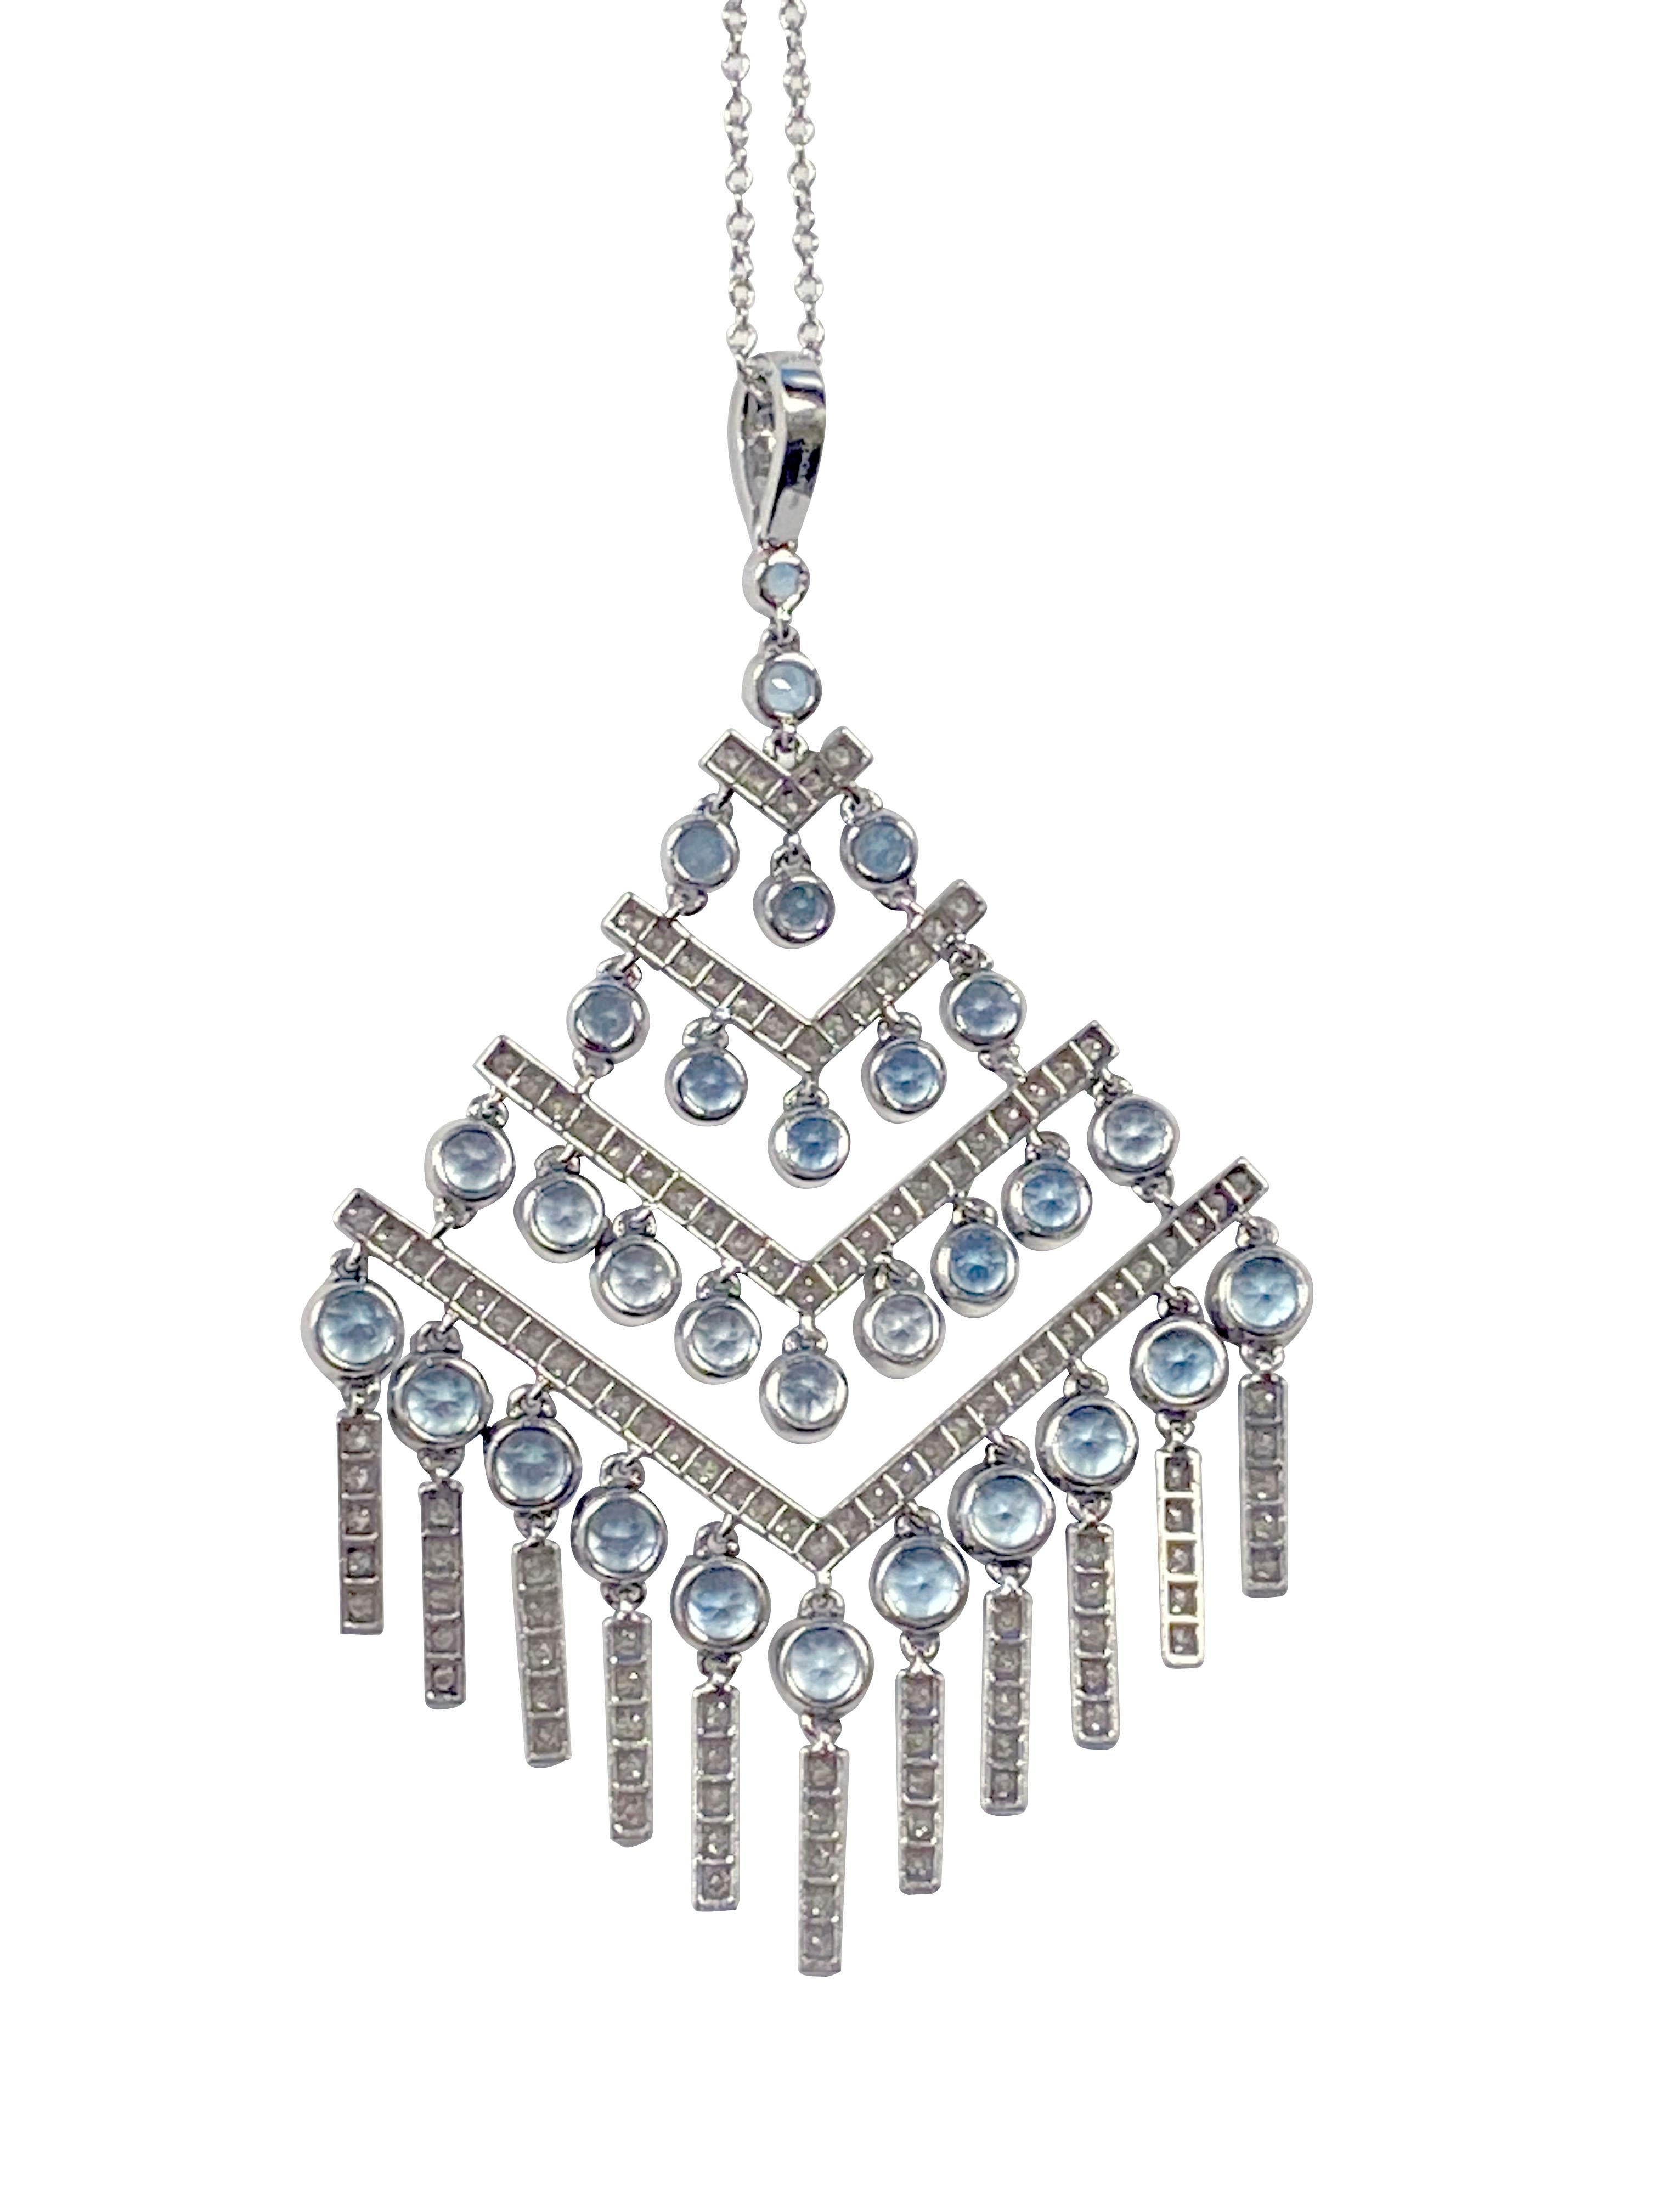 Circa 2000 Tiffany & Company Art Deco Style Pendant Necklace, the all Platinum Fringe Pendant measures 2 1/4 inches in length X 1 1/2 inches, set with Fine Color Round Aquamarines and Round Brilliant cut Diamonds totaling approximately 2 carats.